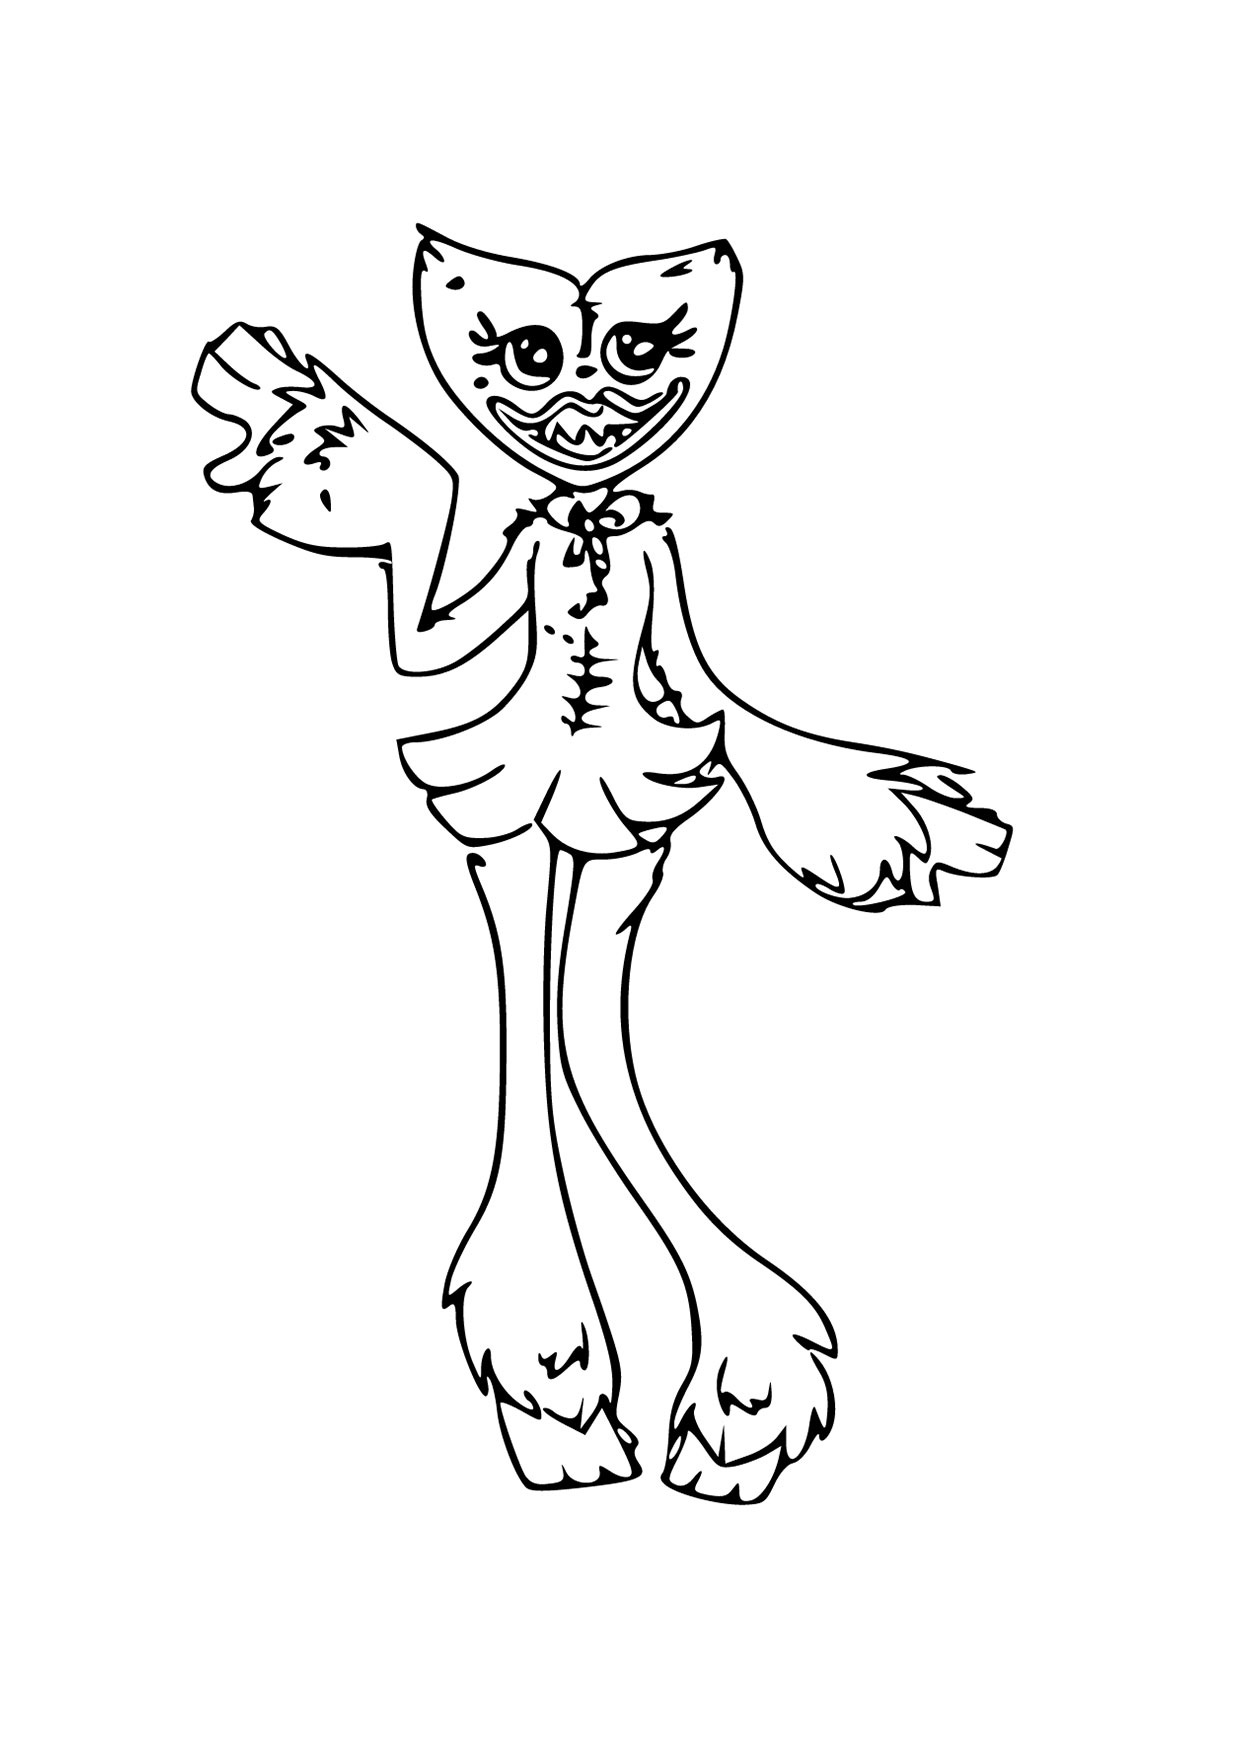 Kissy Missy waving coloring page